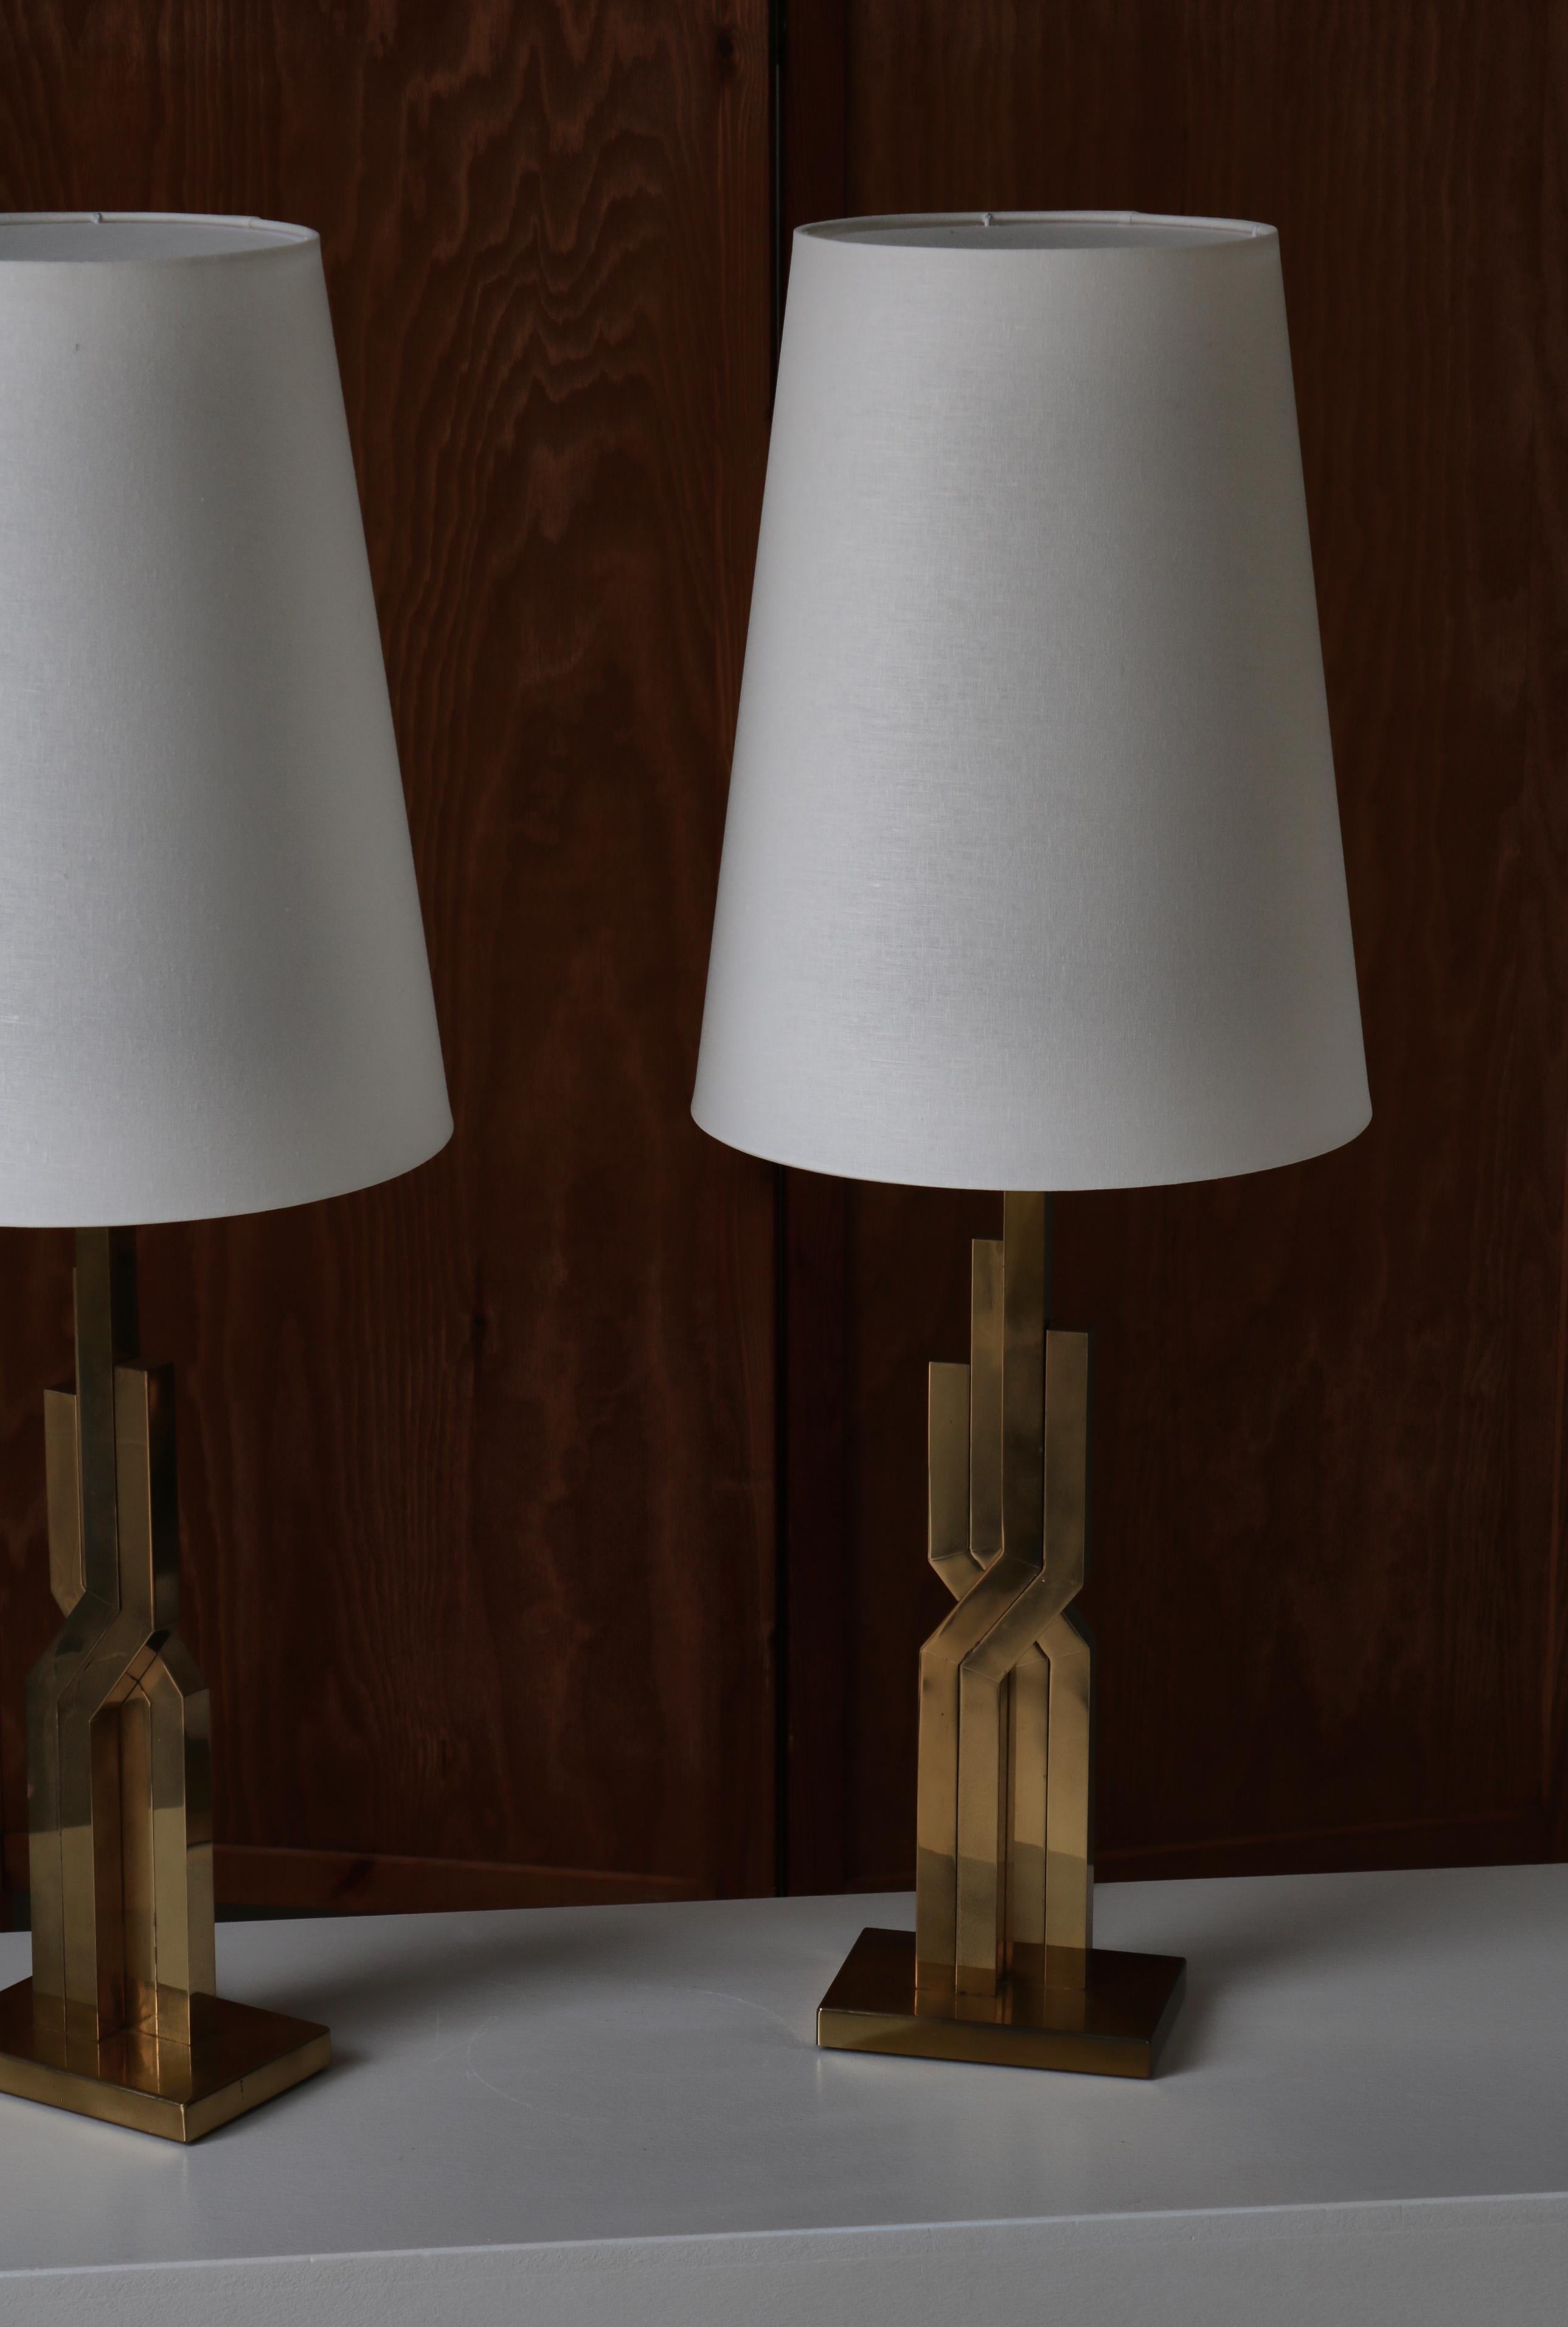 An amazing set of large table lamps model 